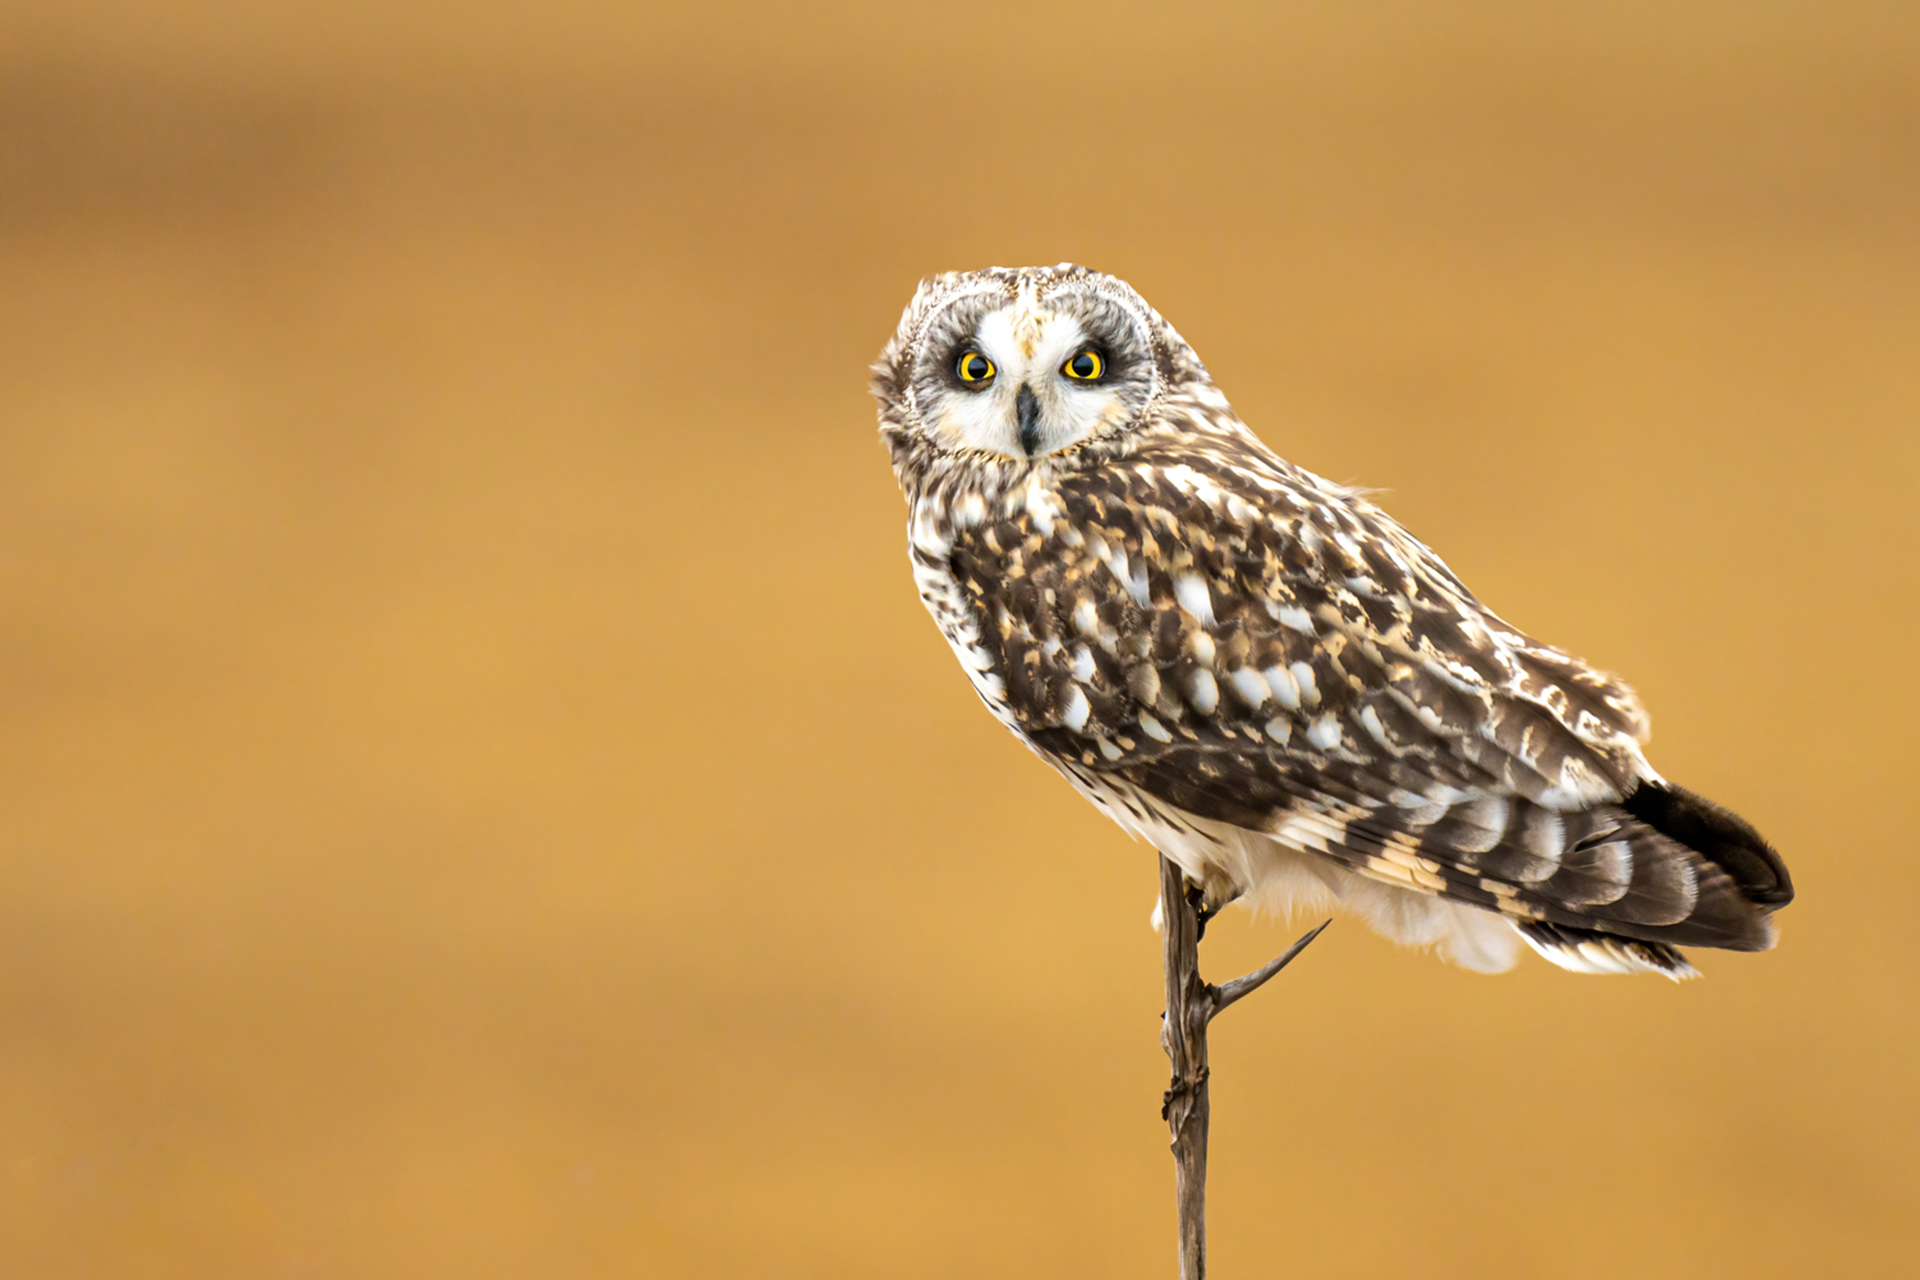 Short-eared Owl perched on a stick